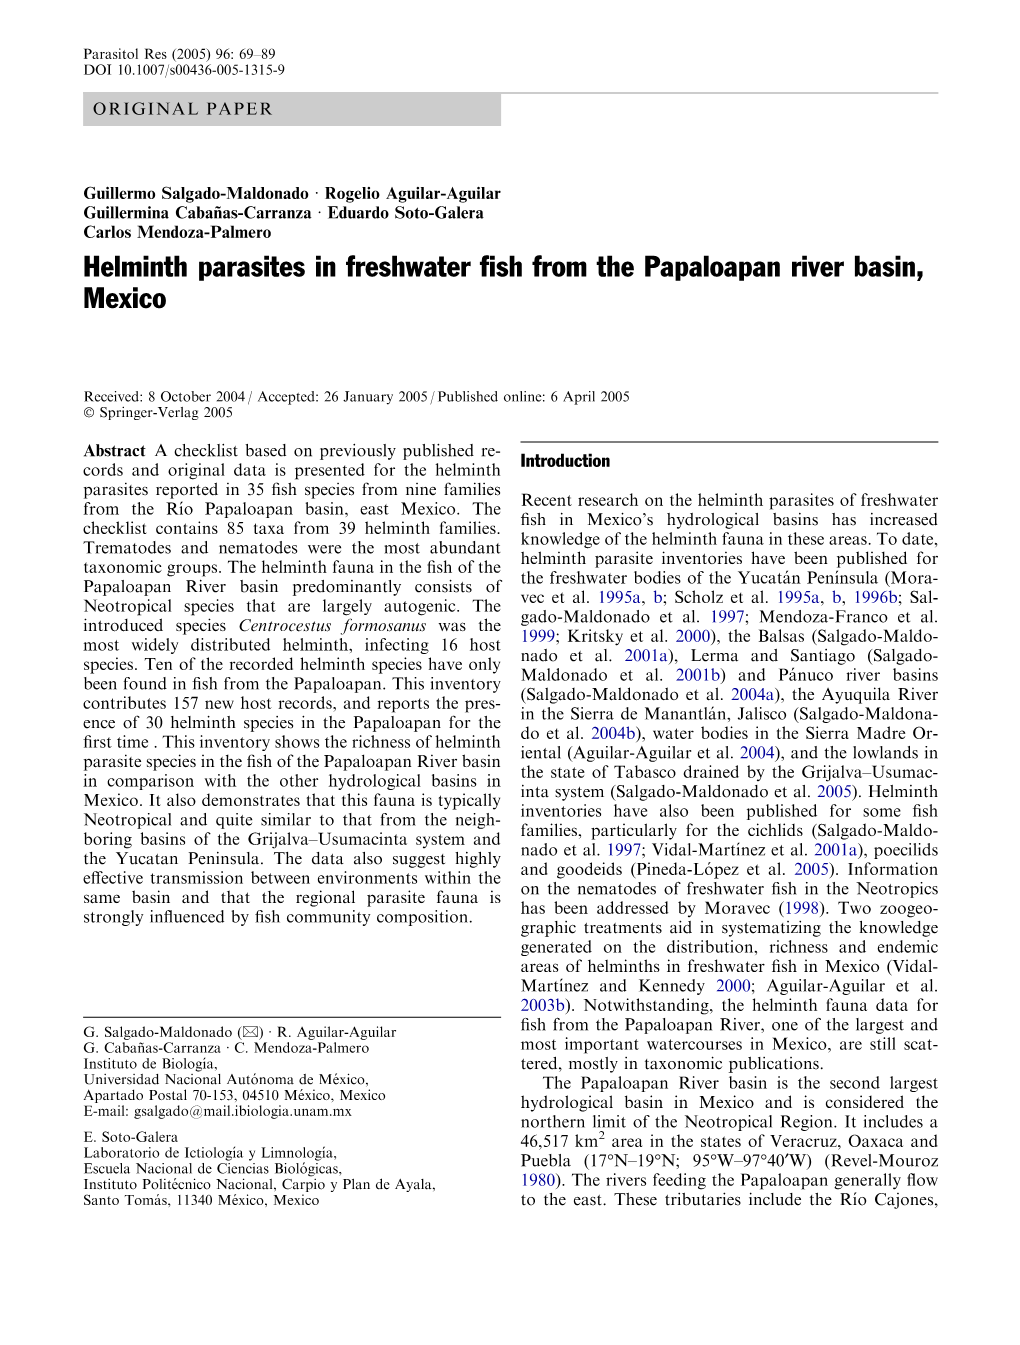 Helminth Parasites in Freshwater Fish from the Papaloapan River Basin